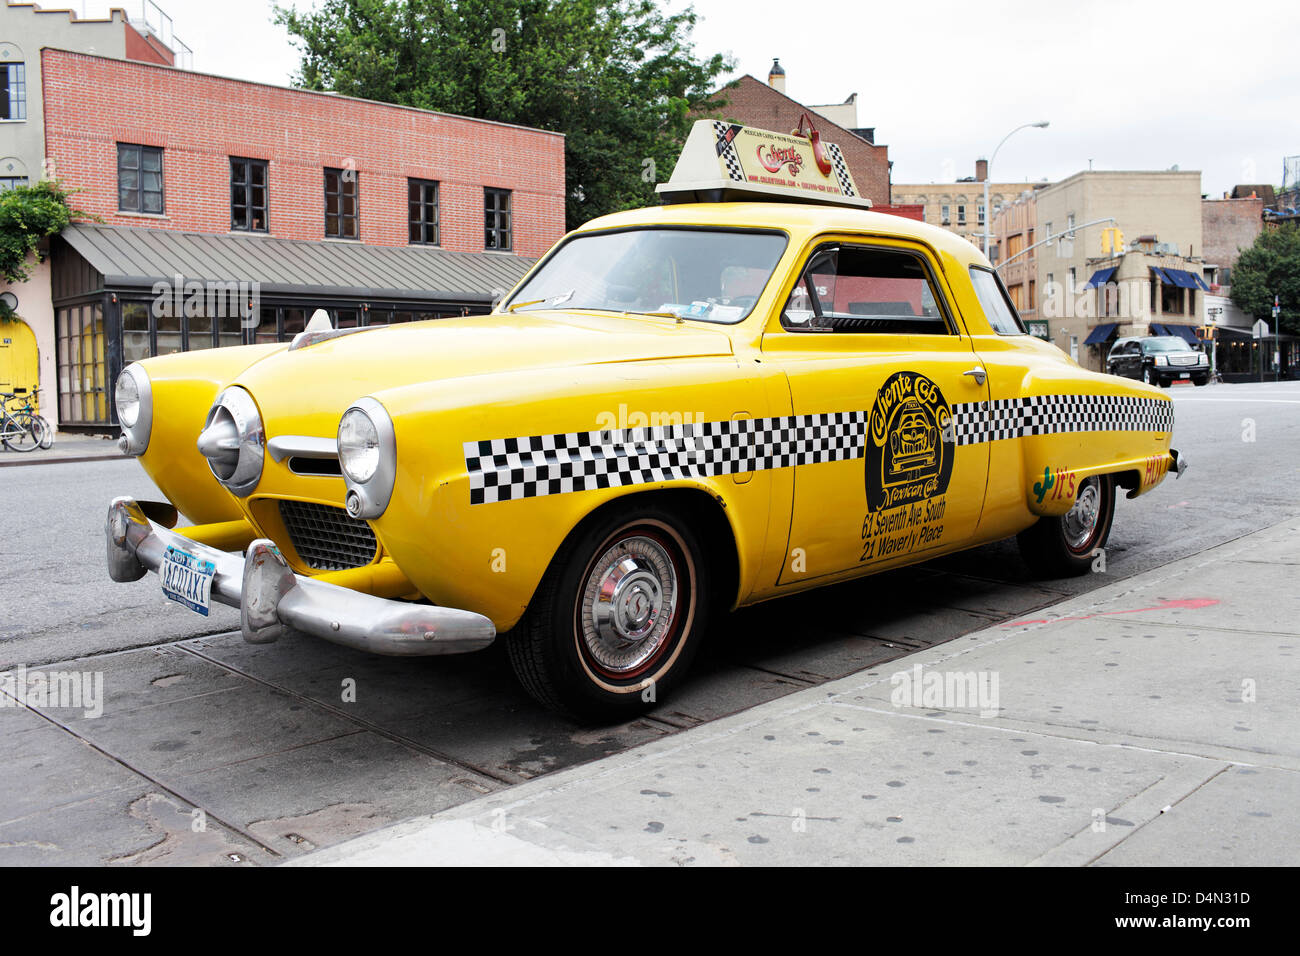 NEW YORK CITY, USA - JUNE 12: Old Studebaker brand car serving as a 'Taco Taxi'. June 12, 2012 in New York City, USA Stock Photo